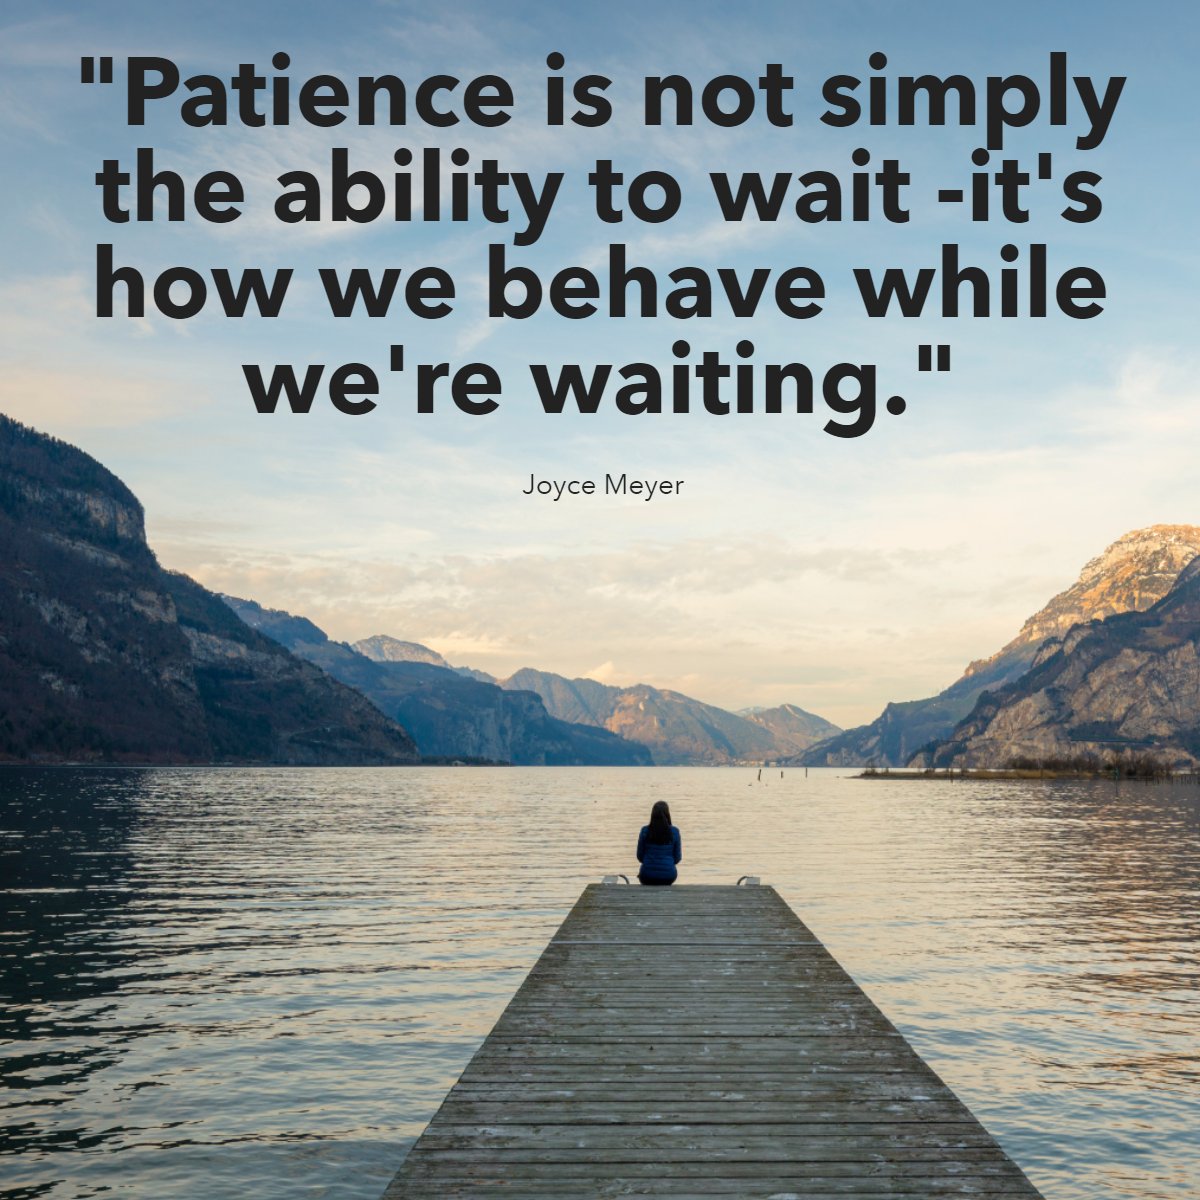 'Patience is not simply the ability to wait - it's how we behave while we're waiting.'
– Joyce Meyer

 #instaquote #wisdom #quoteoftheday